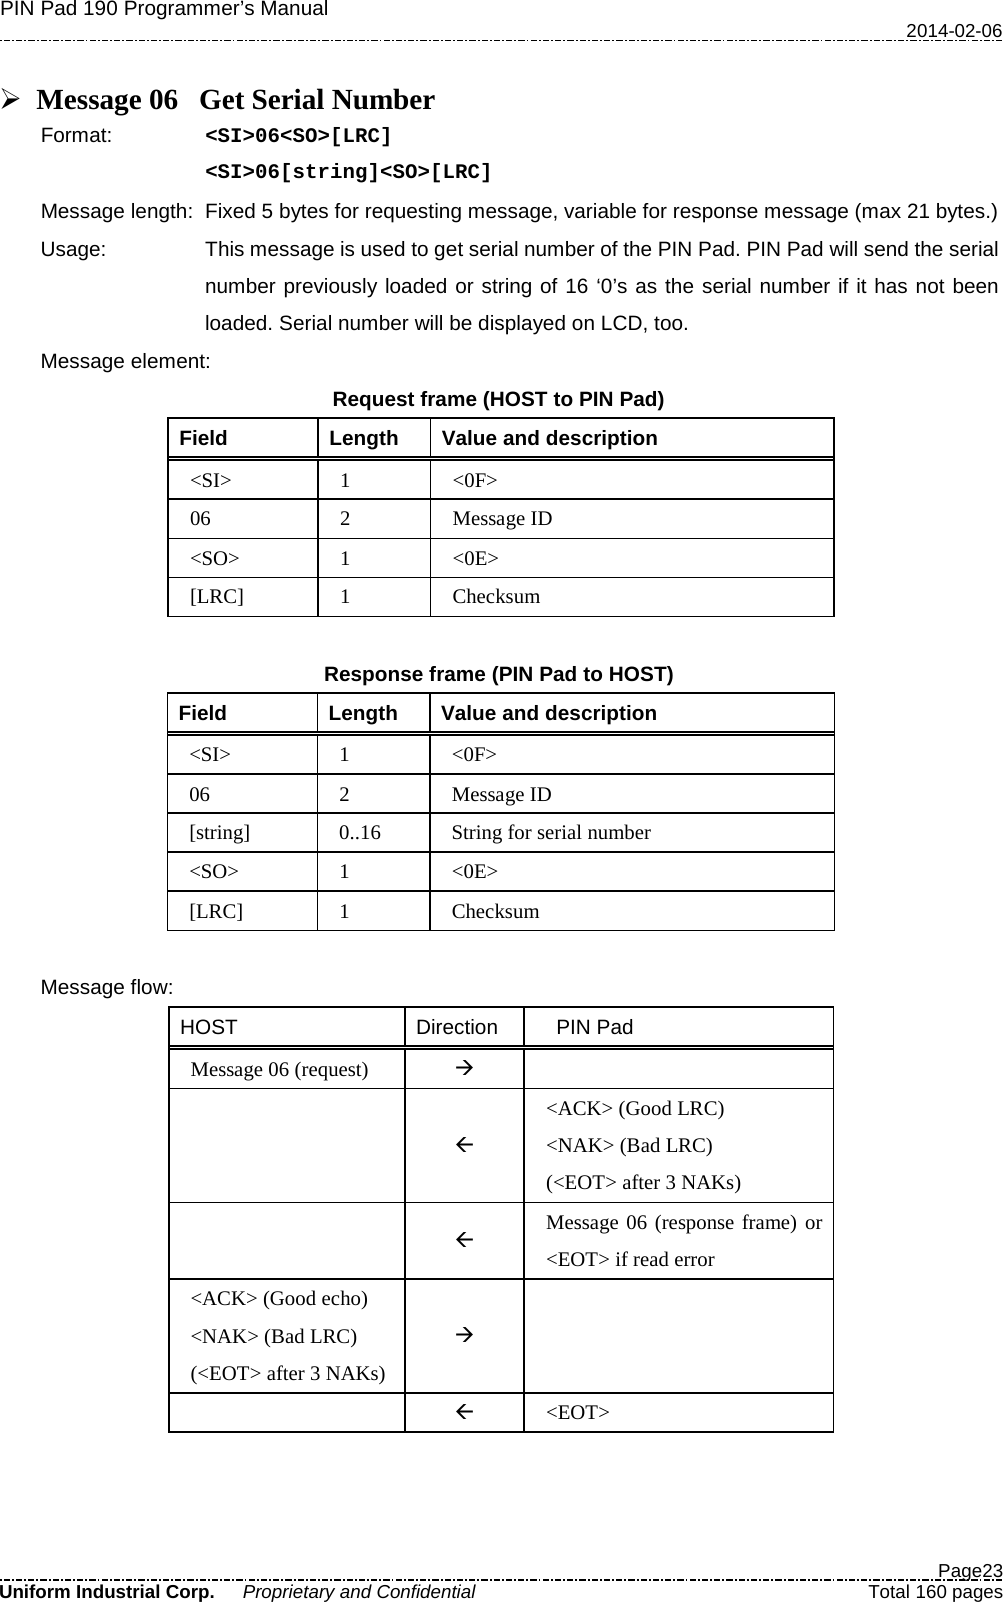 PIN Pad 190 Programmer’s Manual   2014-02-06  Page23 Uniform Industrial Corp. Proprietary and Confidential  Total 160 pages   Message 06 Get Serial Number Format:   &lt;SI&gt;06&lt;SO&gt;[LRC] &lt;SI&gt;06[string]&lt;SO&gt;[LRC] Message length: Fixed 5 bytes for requesting message, variable for response message (max 21 bytes.) Usage: This message is used to get serial number of the PIN Pad. PIN Pad will send the serial number previously loaded or string of 16 ‘0’s as the serial number if it has not been loaded. Serial number will be displayed on LCD, too. Message element: Request frame (HOST to PIN Pad) Field  Length  Value and description &lt;SI&gt;  1  &lt;0F&gt; 06  2  Message ID &lt;SO&gt;  1  &lt;0E&gt; [LRC]  1  Checksum  Response frame (PIN Pad to HOST) Field  Length  Value and description &lt;SI&gt;  1  &lt;0F&gt; 06  2  Message ID [string]  0..16 String for serial number &lt;SO&gt;  1  &lt;0E&gt; [LRC]  1  Checksum  Message flow: HOST Direction   PIN Pad Message 06 (request)     &lt;ACK&gt; (Good LRC) &lt;NAK&gt; (Bad LRC) (&lt;EOT&gt; after 3 NAKs)   Message 06 (response frame) or &lt;EOT&gt; if read error &lt;ACK&gt; (Good echo) &lt;NAK&gt; (Bad LRC) (&lt;EOT&gt; after 3 NAKs)     &lt;EOT&gt;  